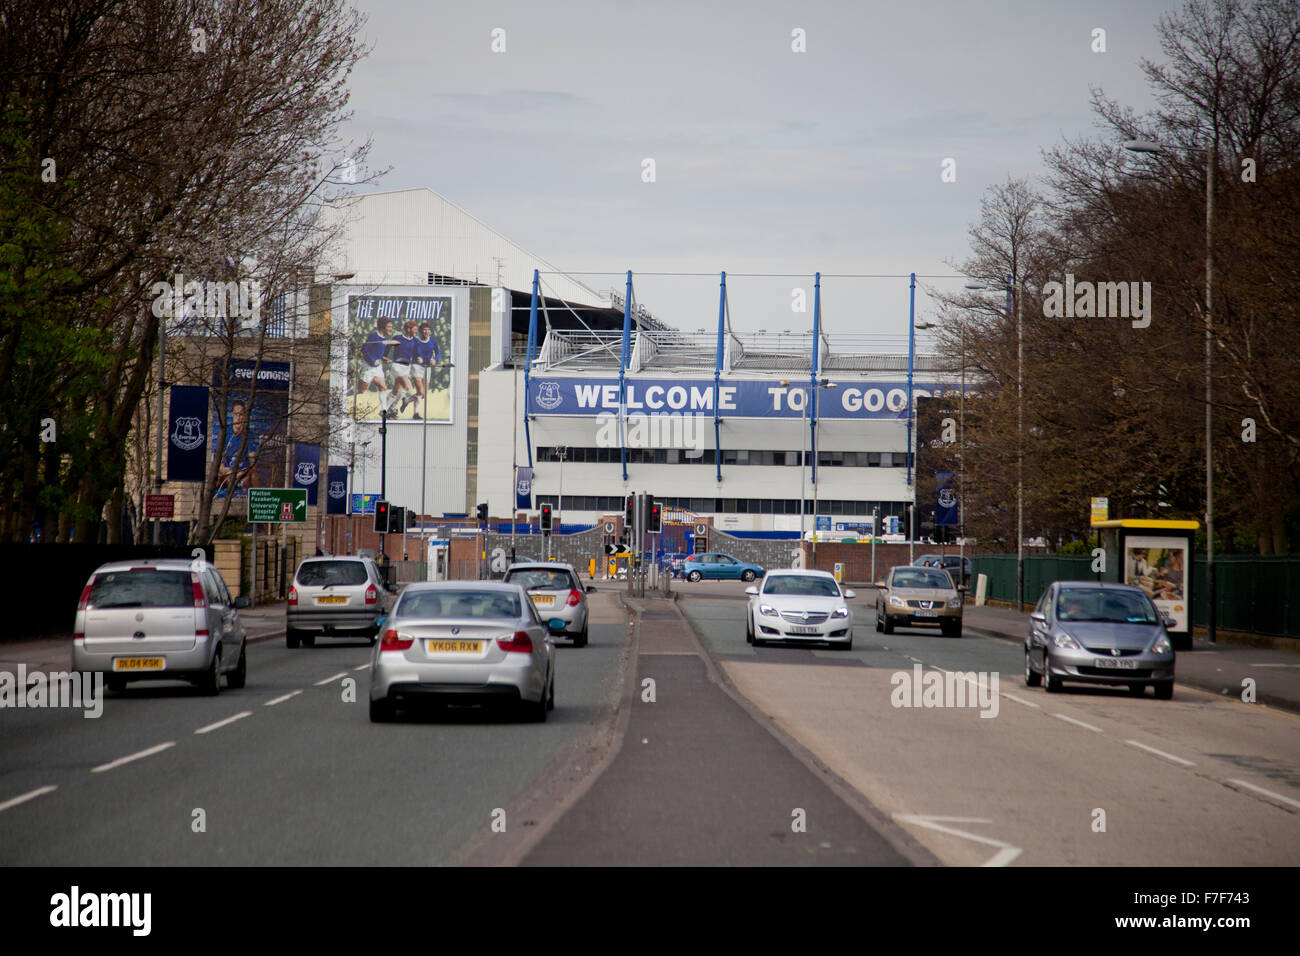 Documentary pictures Everton FC, Goodison to Liverpool FC, Anfield, Liverpool, England Stock Photo